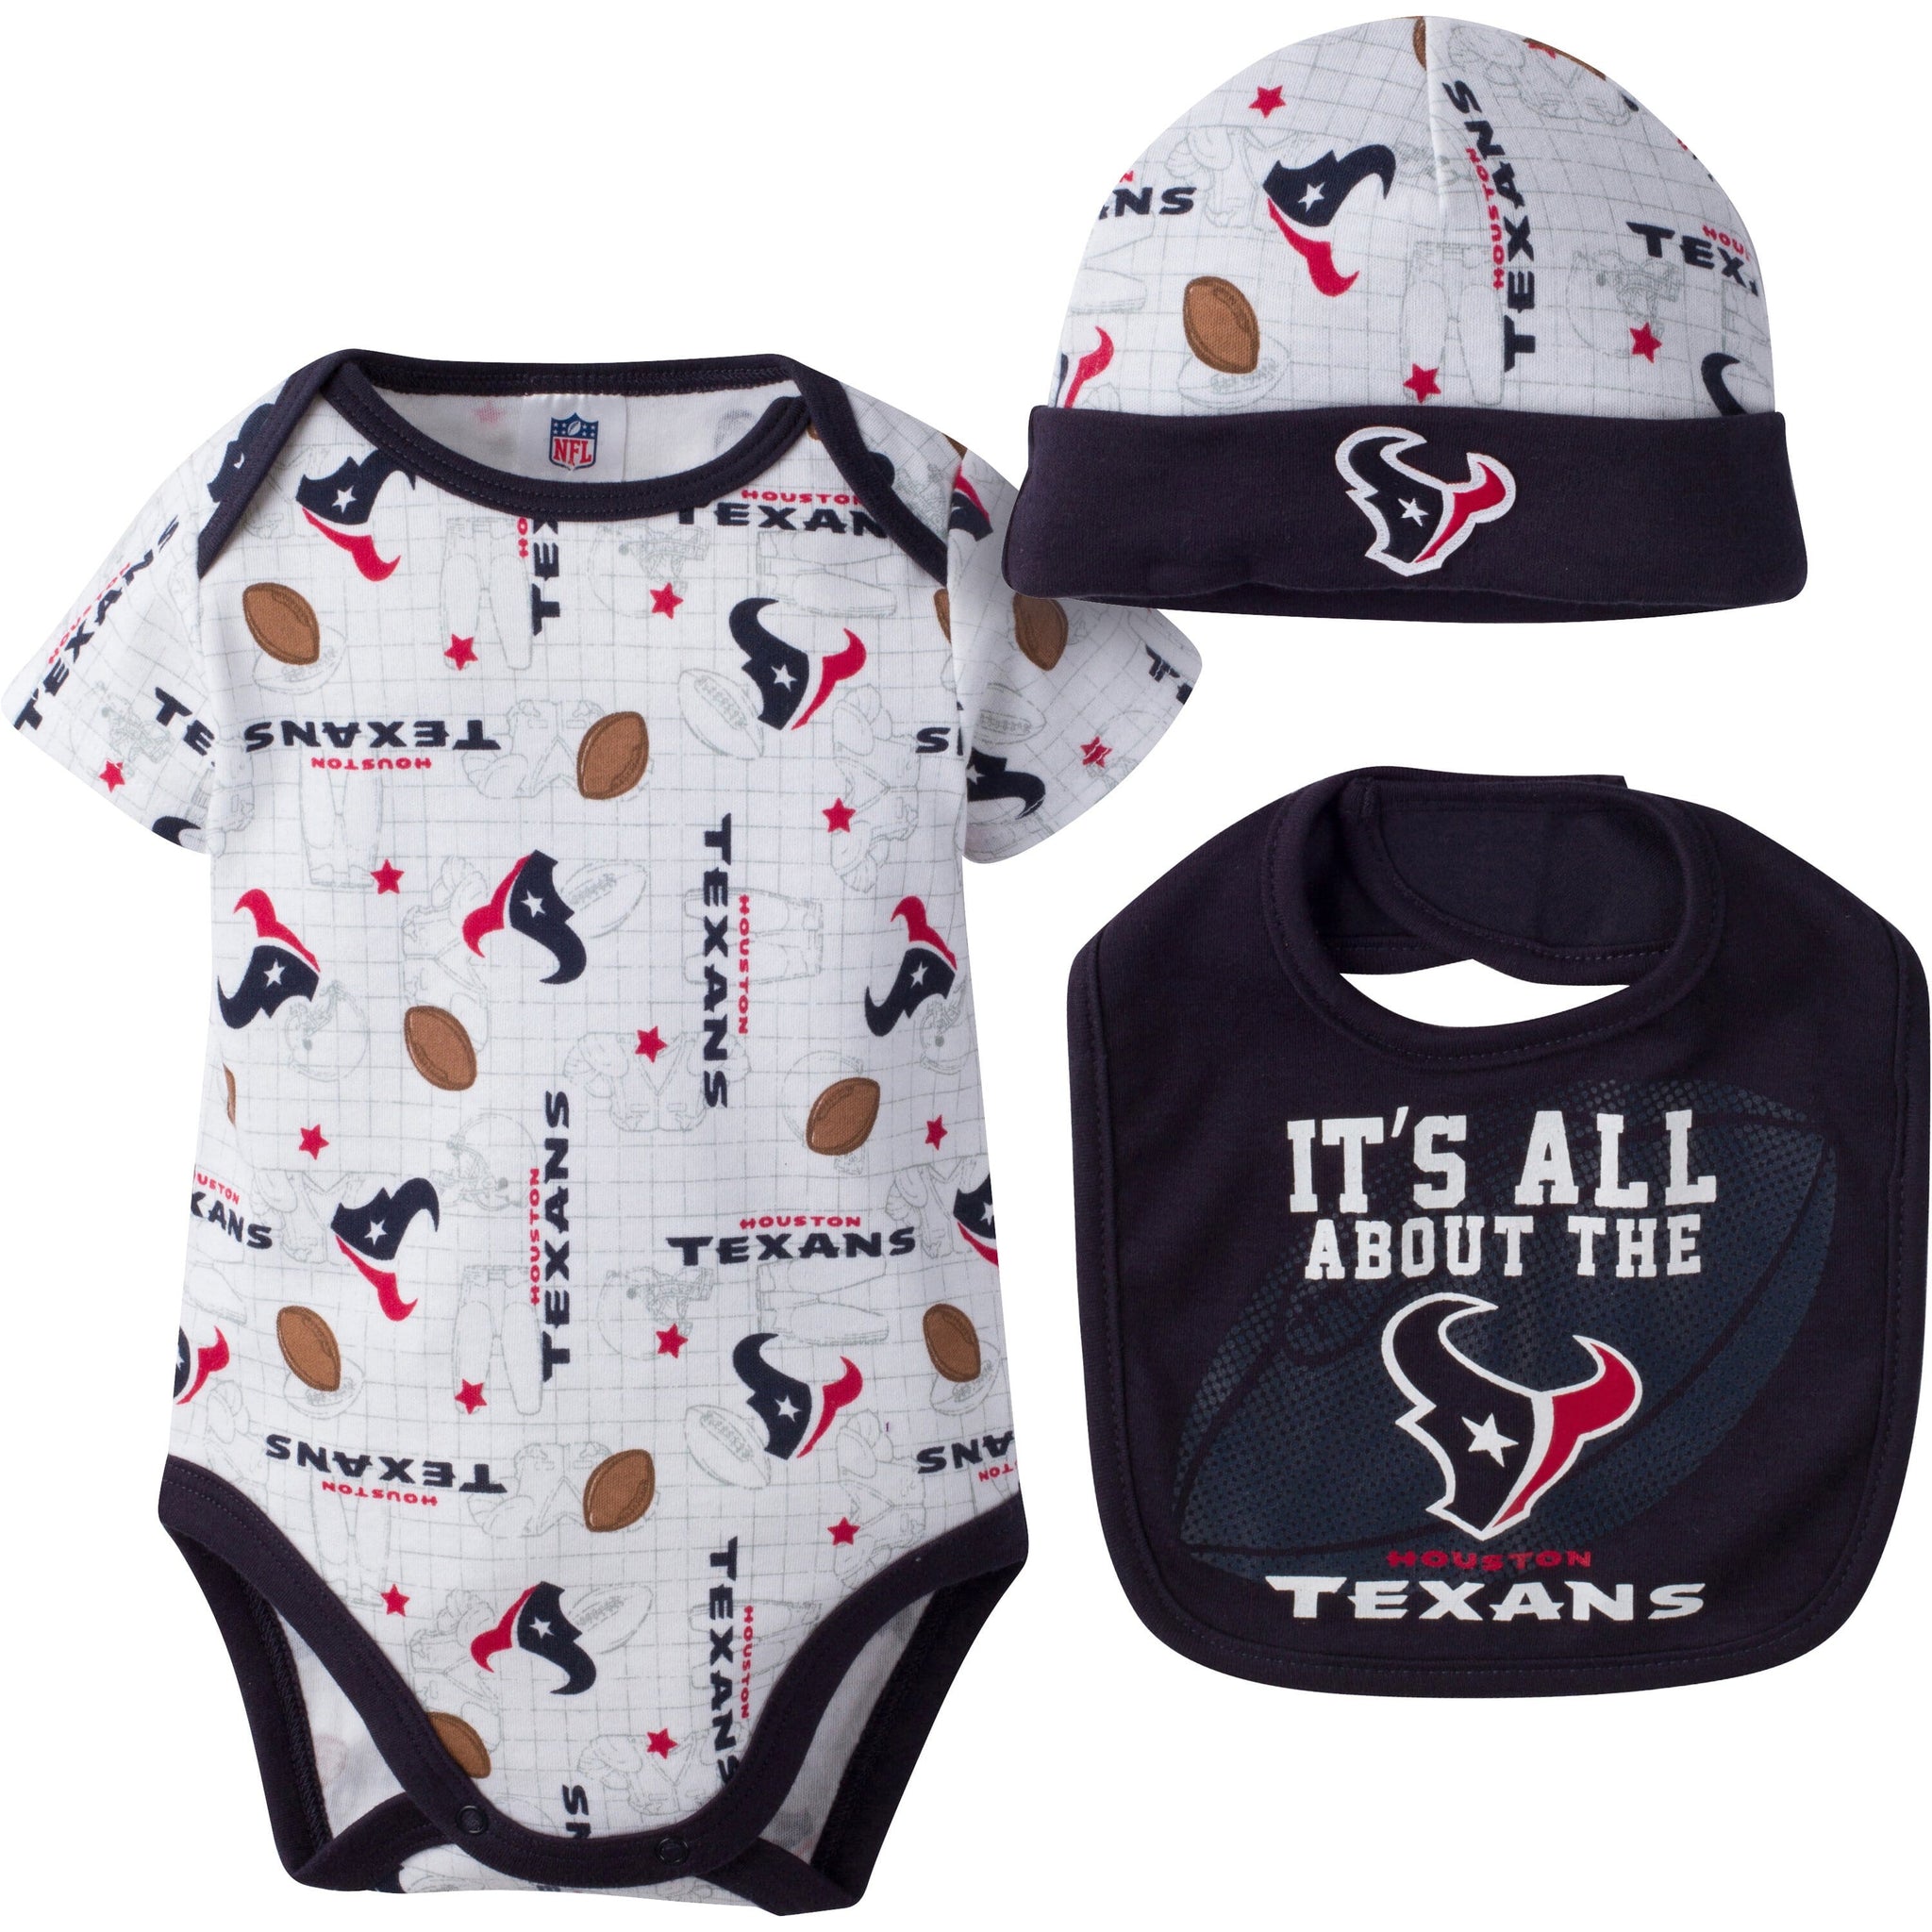 baby girl texans outfit